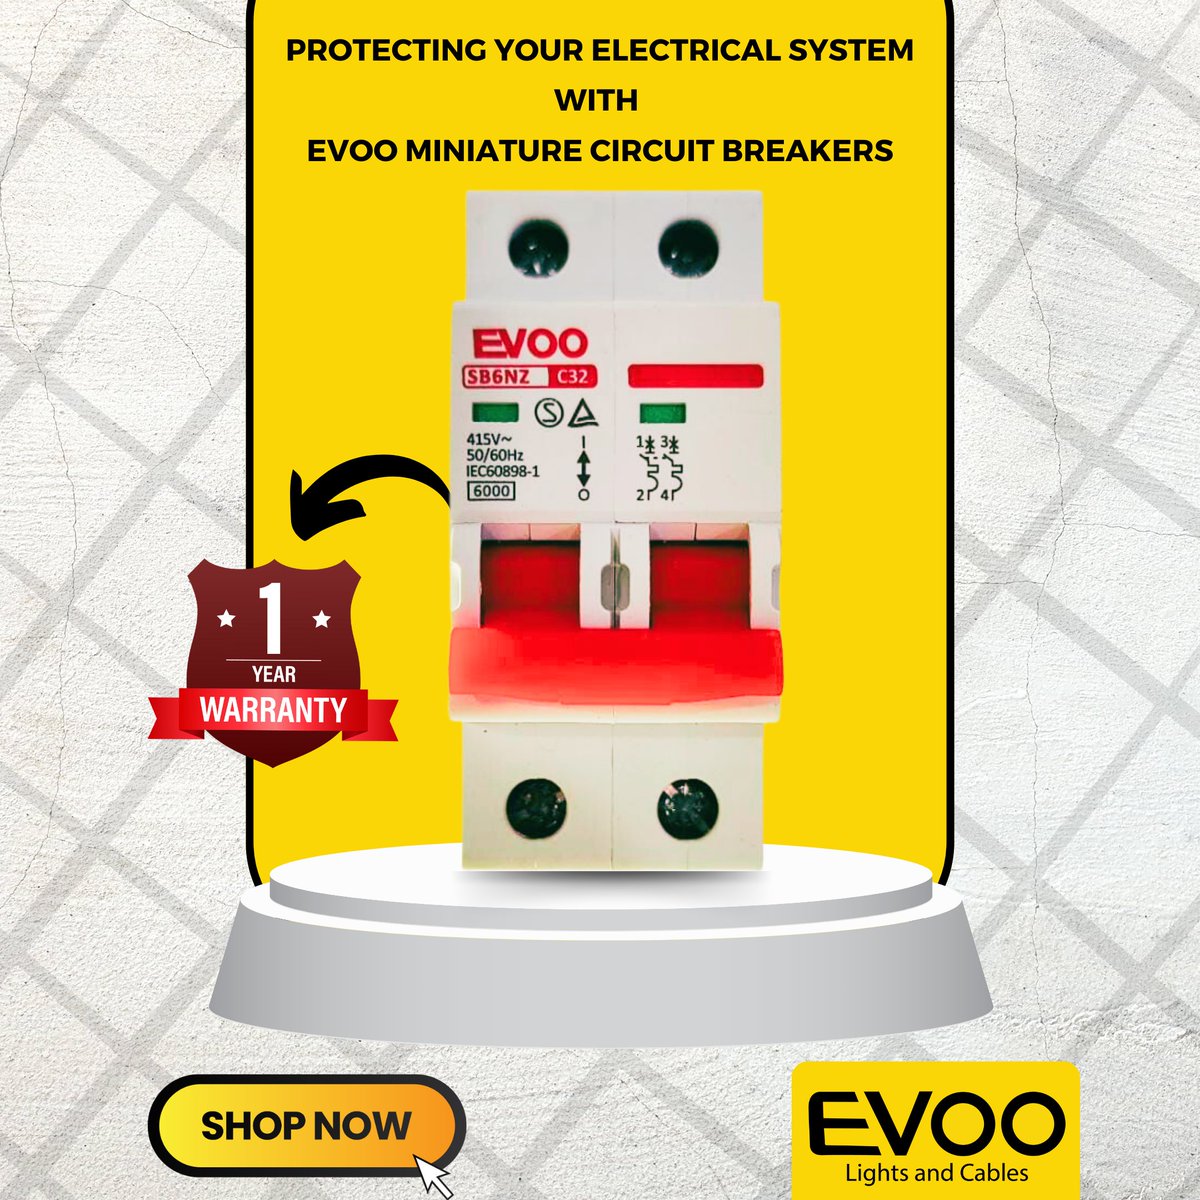 EVOO Miniature Circuit Breakers are the Preferred Choice for Protecting Electrical Circuits in Residential, Commercial, and Industrial Settings.
.
Contact Us: 0329 8680000
.
#CircuitProtection #MiniatureCircuitBreakers #HomeSafety